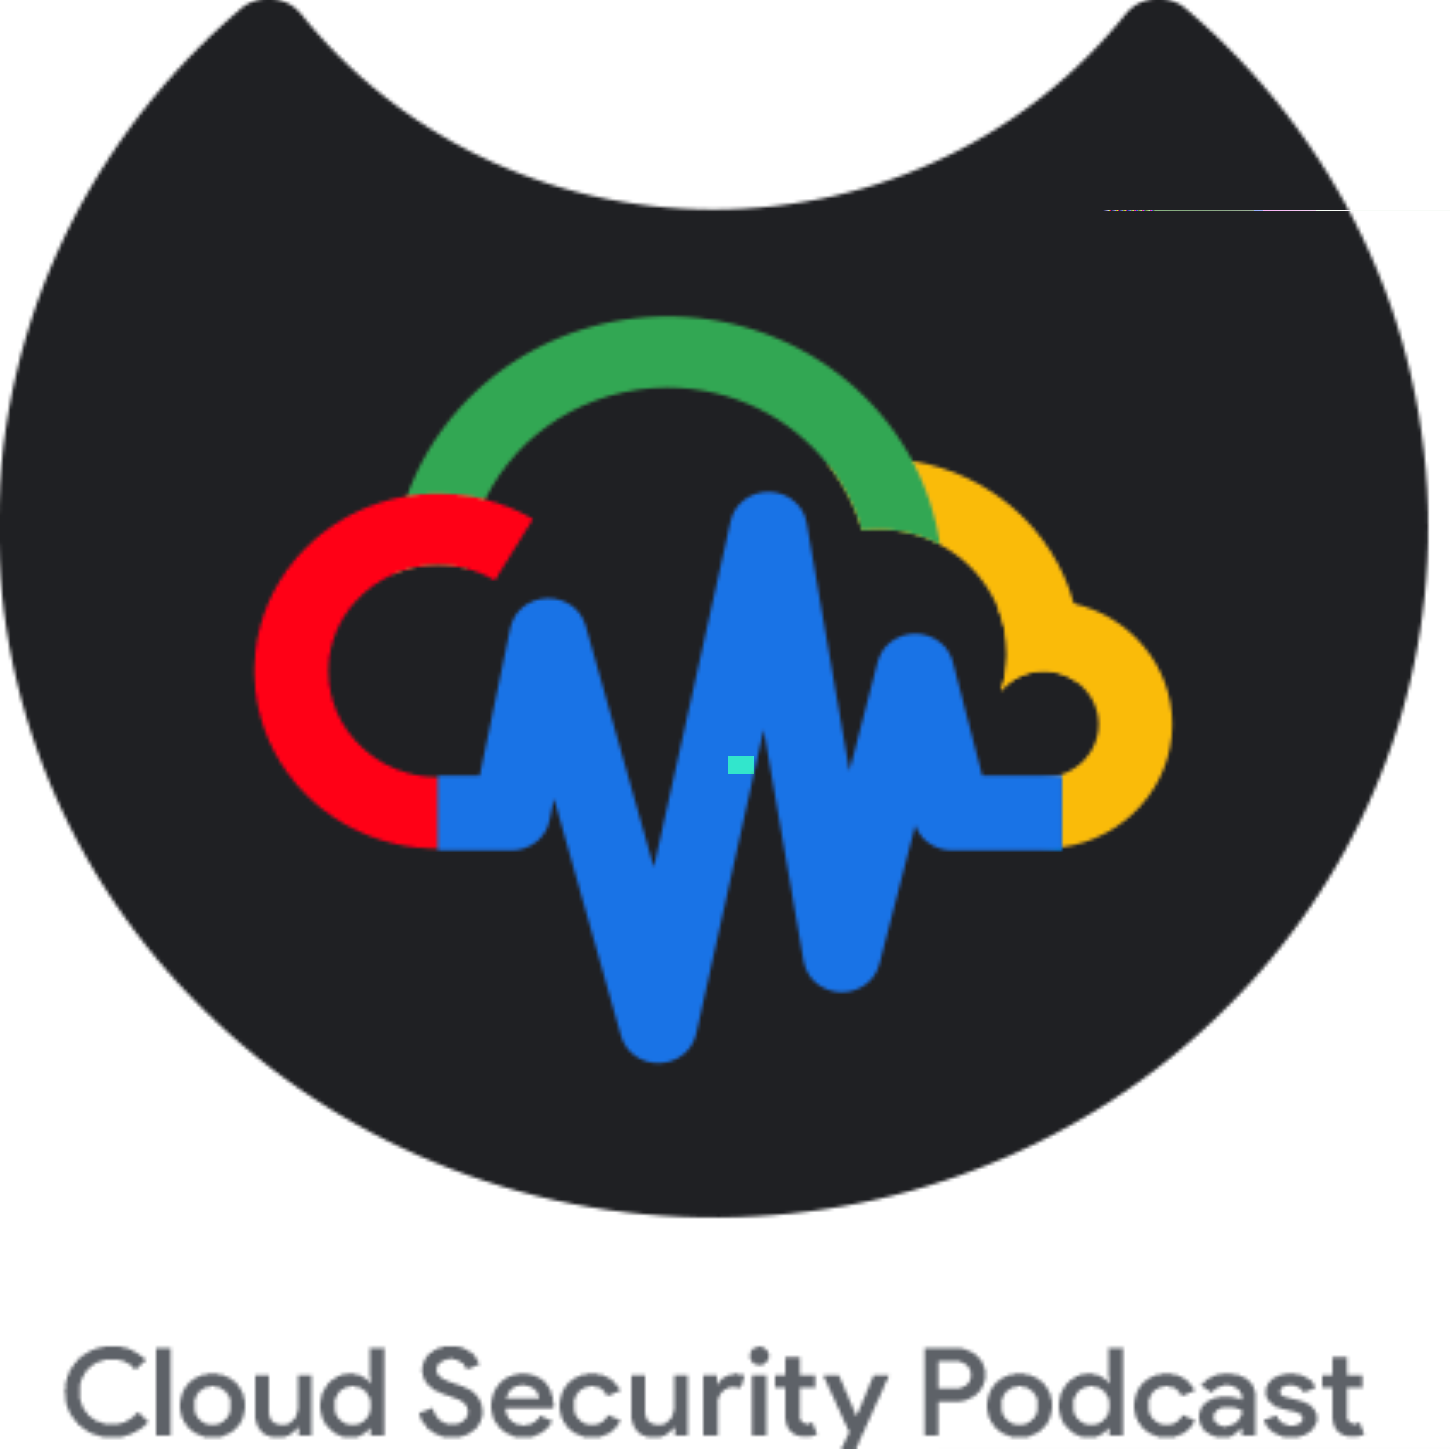 A highlight from EP112 Threat Horizons - How Google Does Threat Intelligence